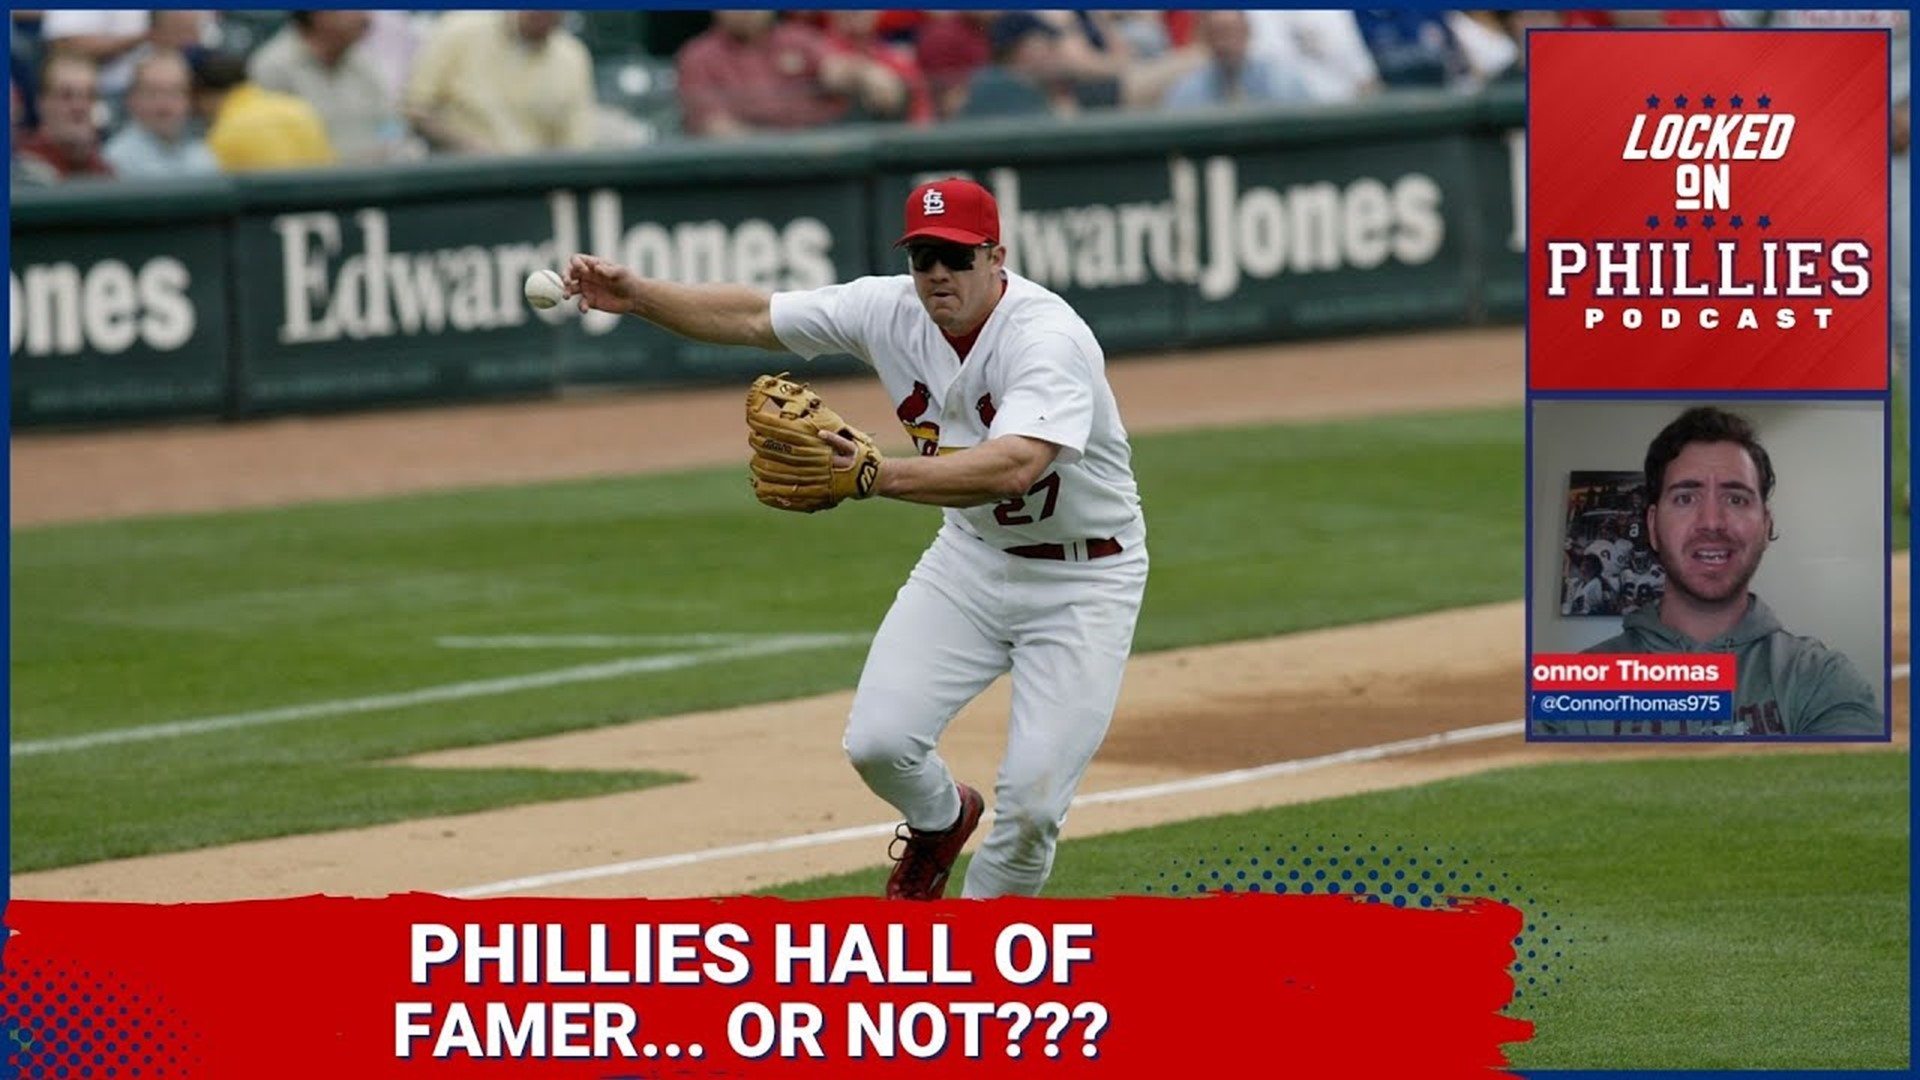 Connor reacts to the BBWAA vote on the 2023 Hall of Fame Class that sent Scott Rolen to the Hall, and discusses whether or not the Phillies can or should claim him.